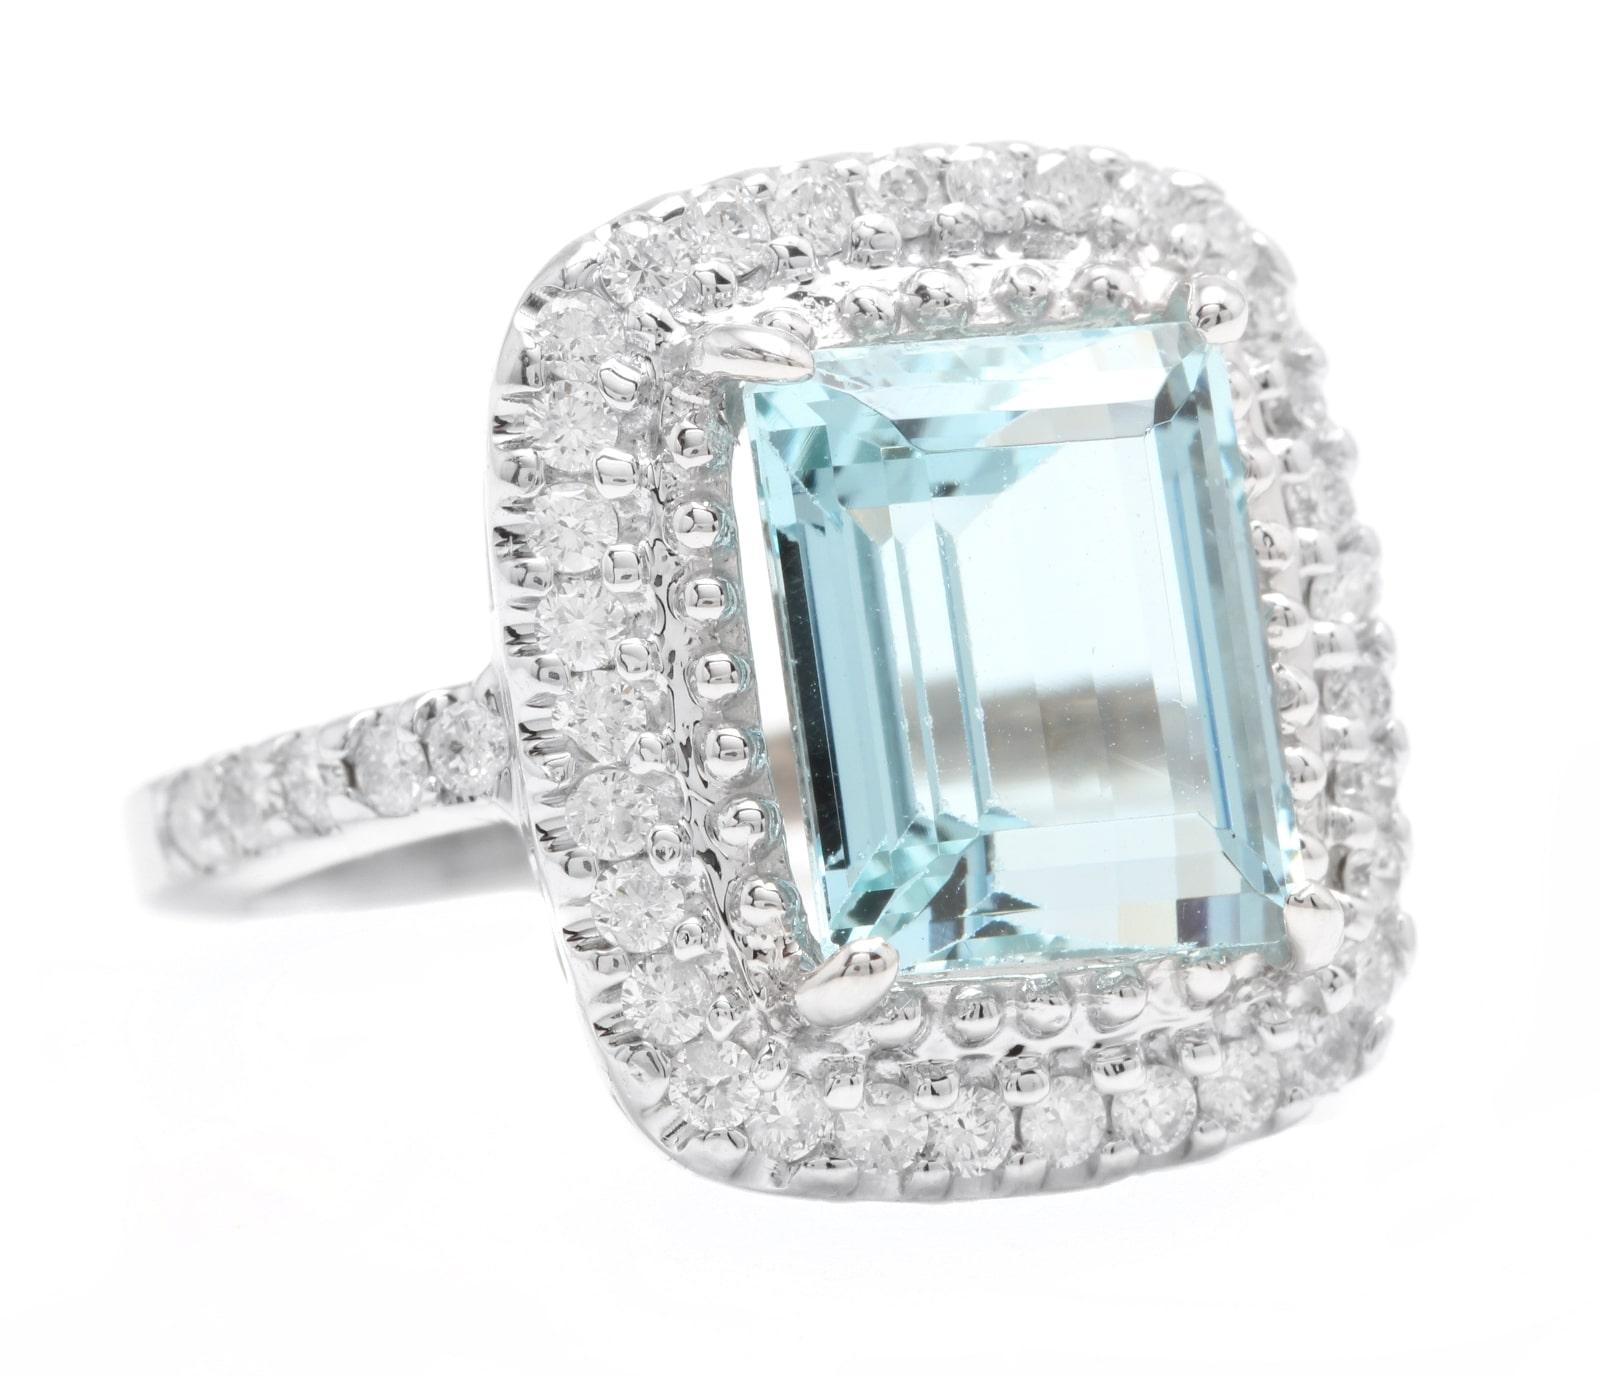 5.80 Carats Natural Aquamarine and Diamond 14K Solid White Gold Ring

Suggested Replacement Value: Approx. $6,500.00

Total Natural Emerald Cut Aquamarine Weights: Approx. 5.00 Carats 

Aquamarine Measures: Approx. 11 x 9mm

Aquamarine Treatment: